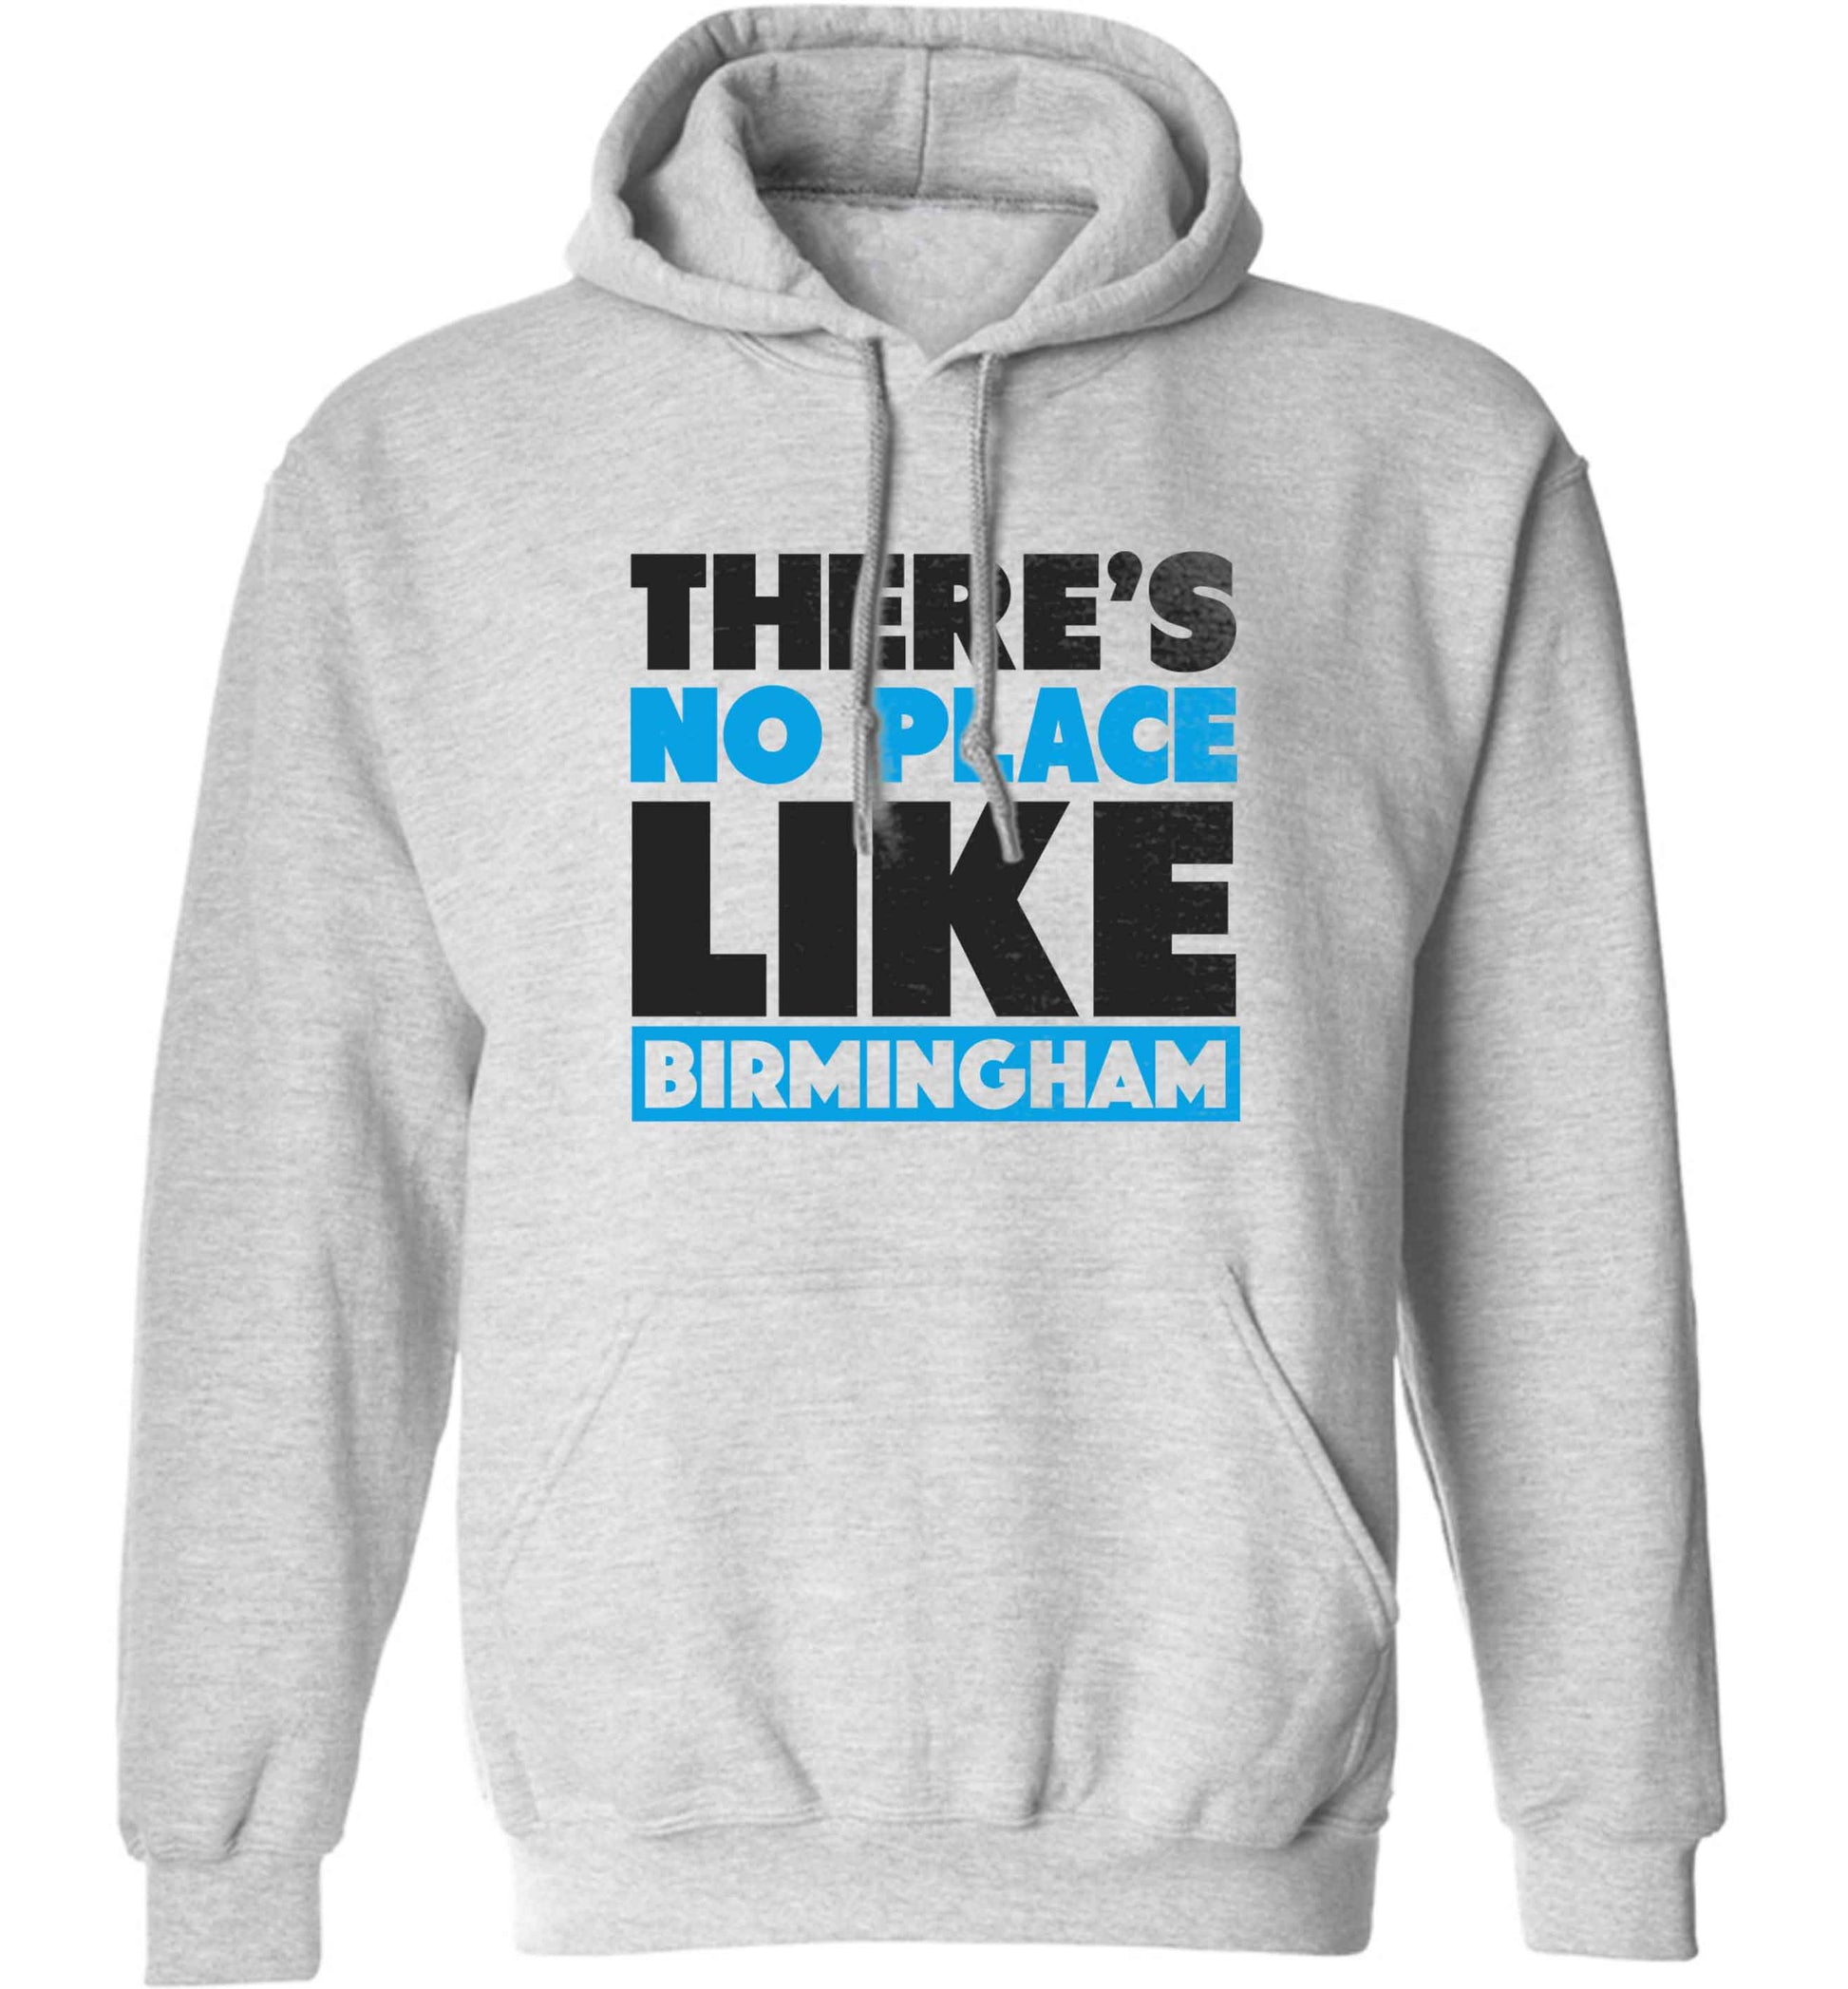 There's no place like Birmingham adults unisex grey hoodie 2XL